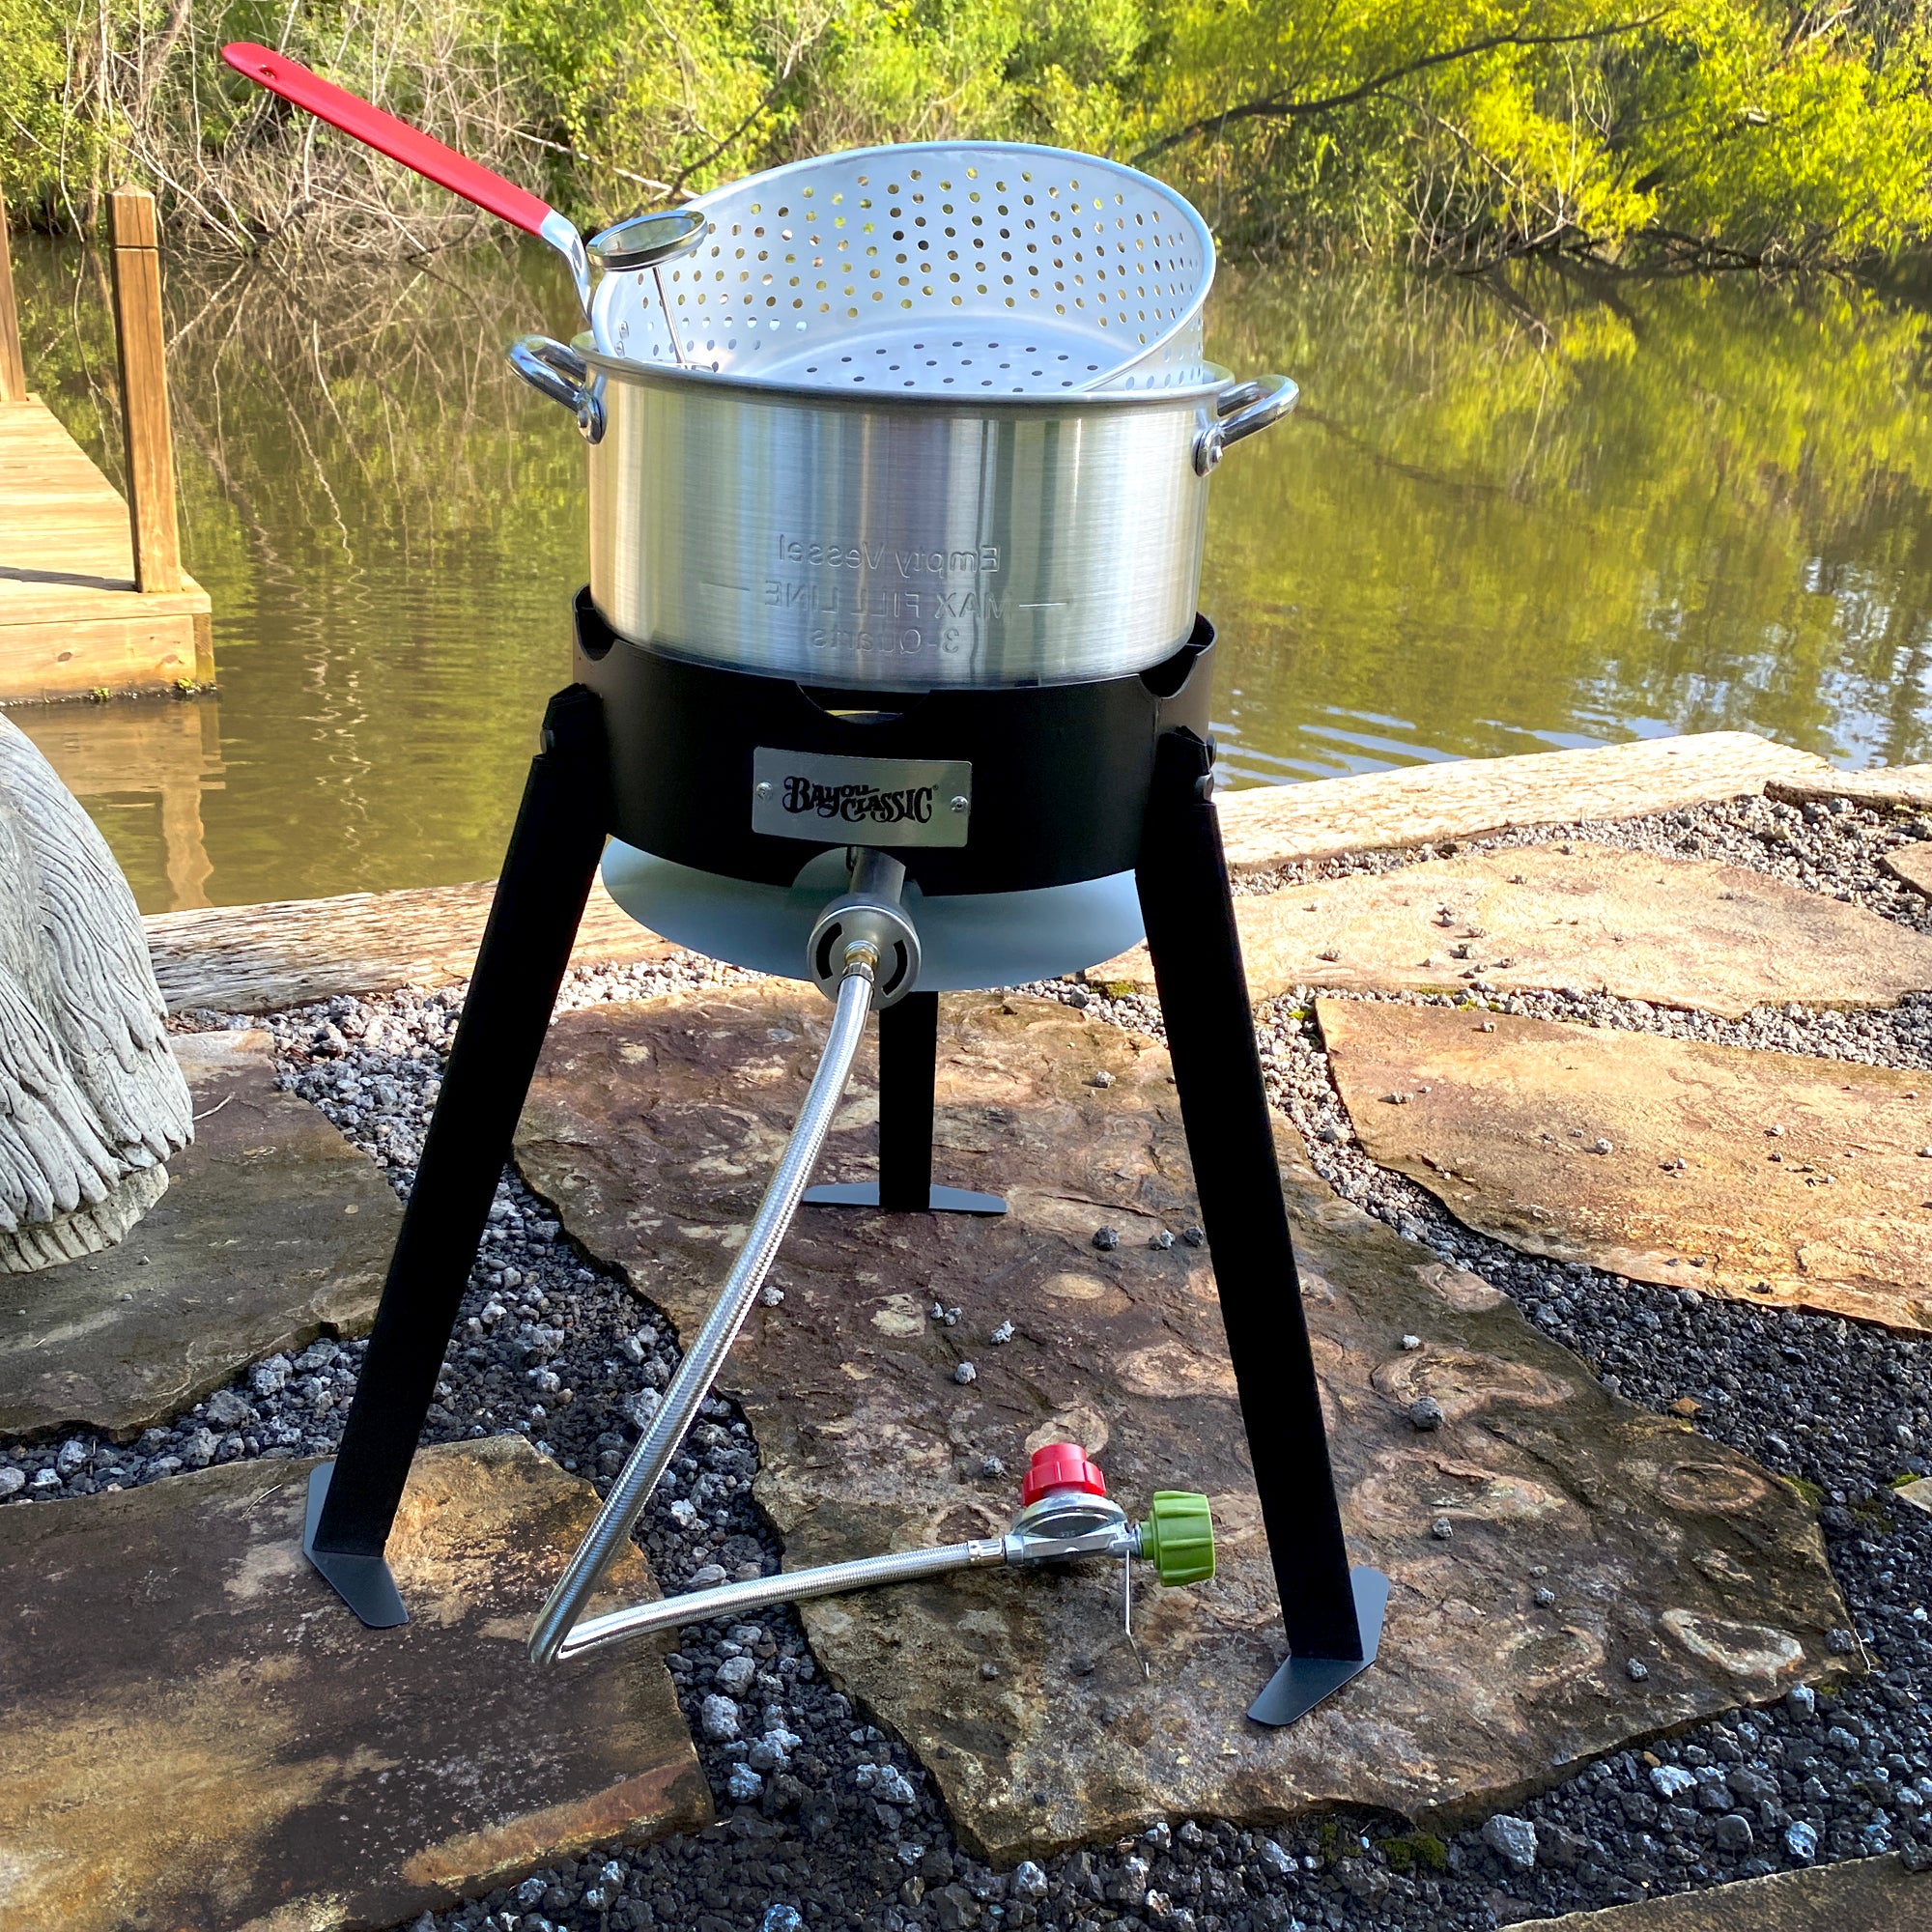 10 Qt. Fry Pot with Strainer